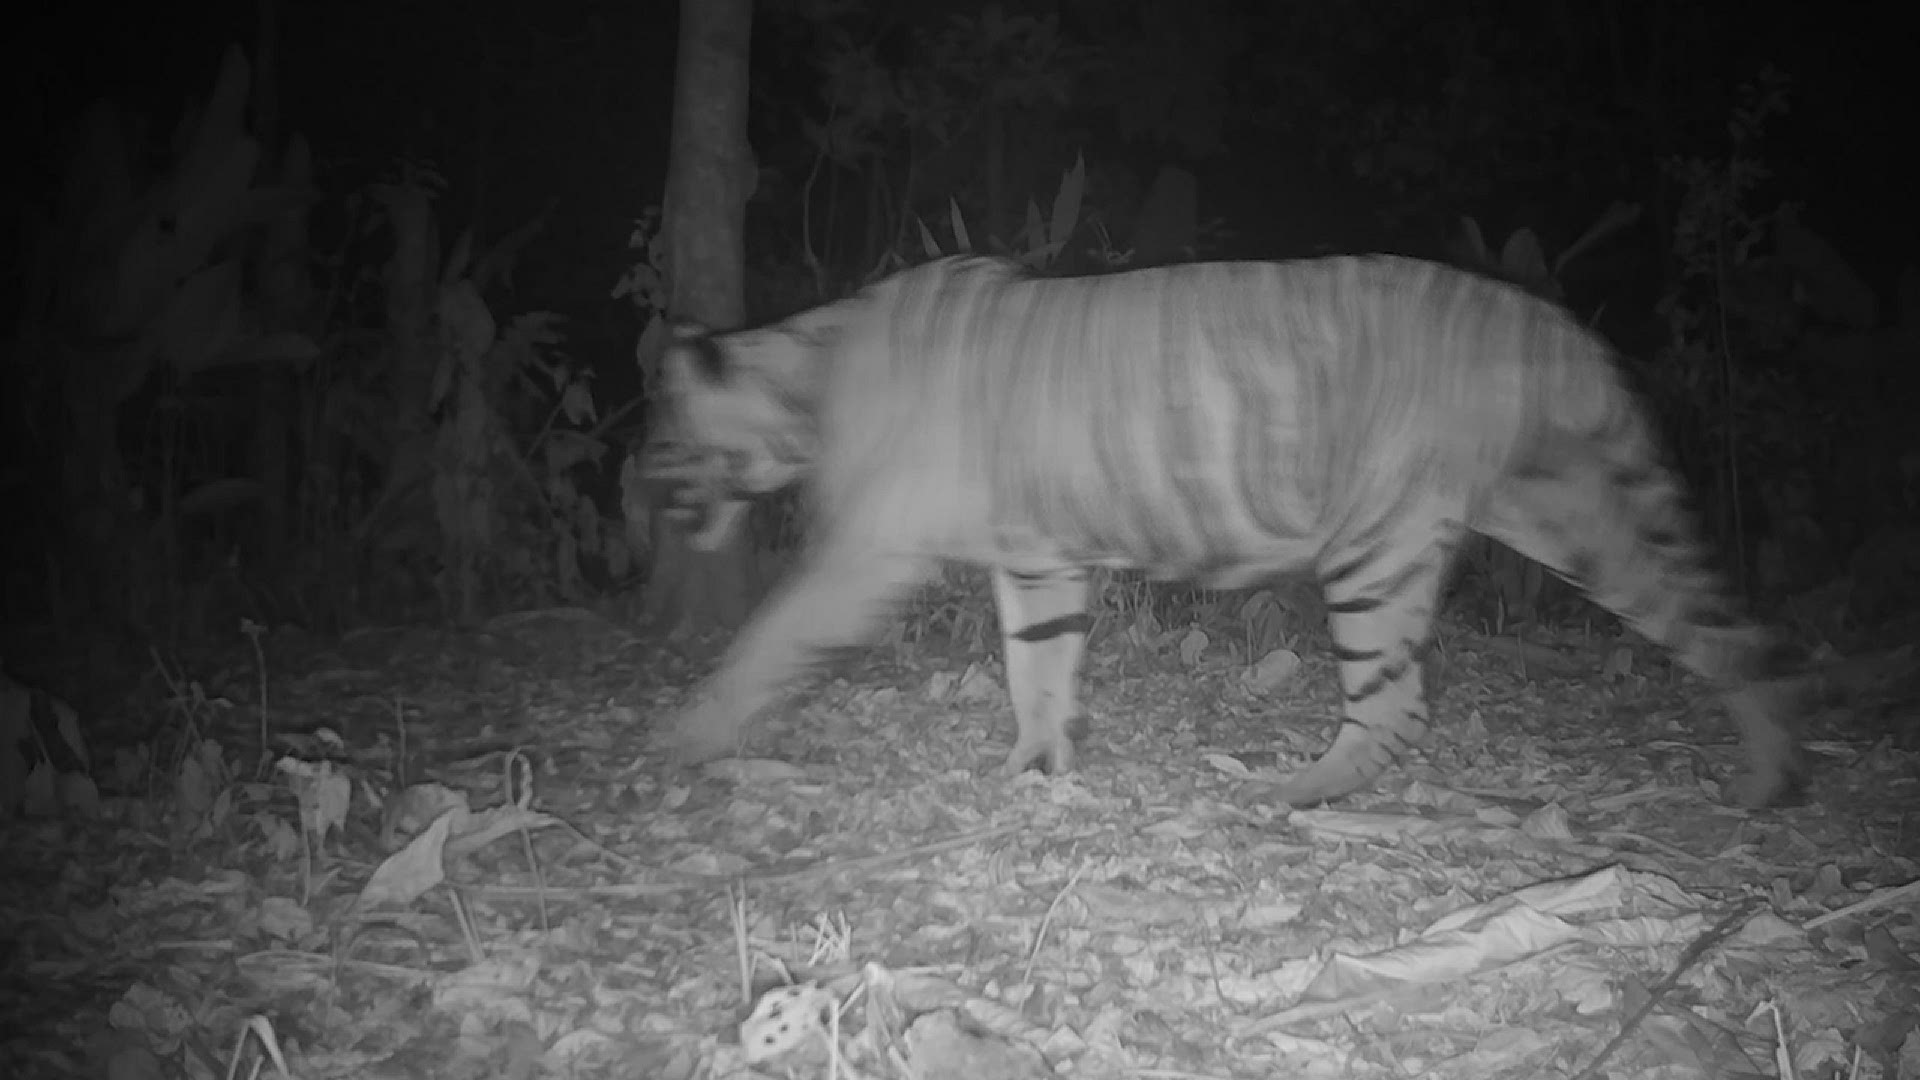 Video captured by conservation organizations show tigers for the first time in western Thailand in four years.